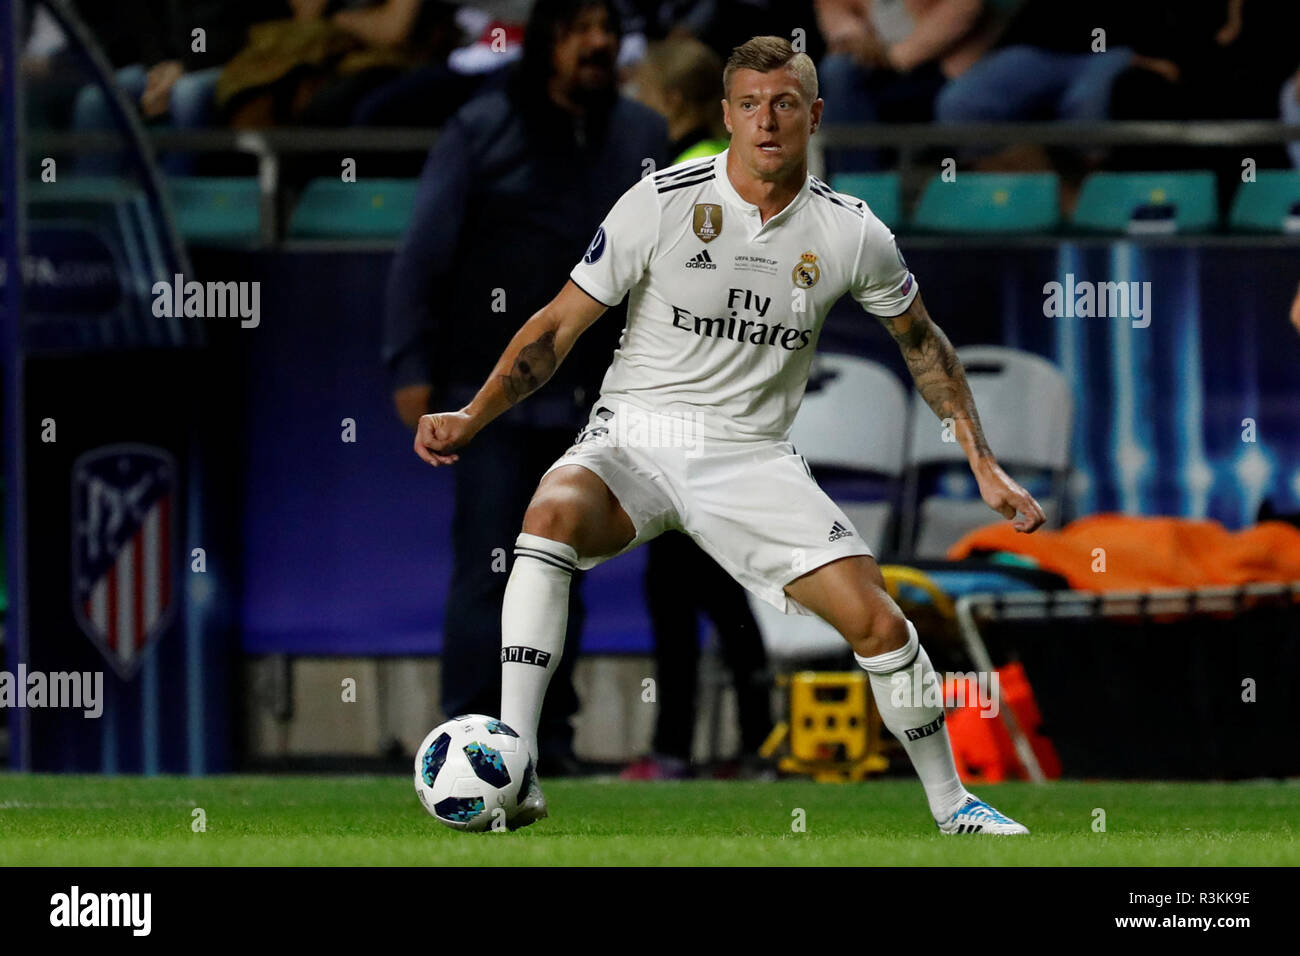 TALLINN, ESTONIA - AUGUST 15: Toni Kroos of Real Madrid in action during the UEFA Super Cup match between Real Madrid and Atletico Madrid at A Le Coq Arena on August 15, 2018 in Tallinn, Estonia. (MB Media) Stock Photo